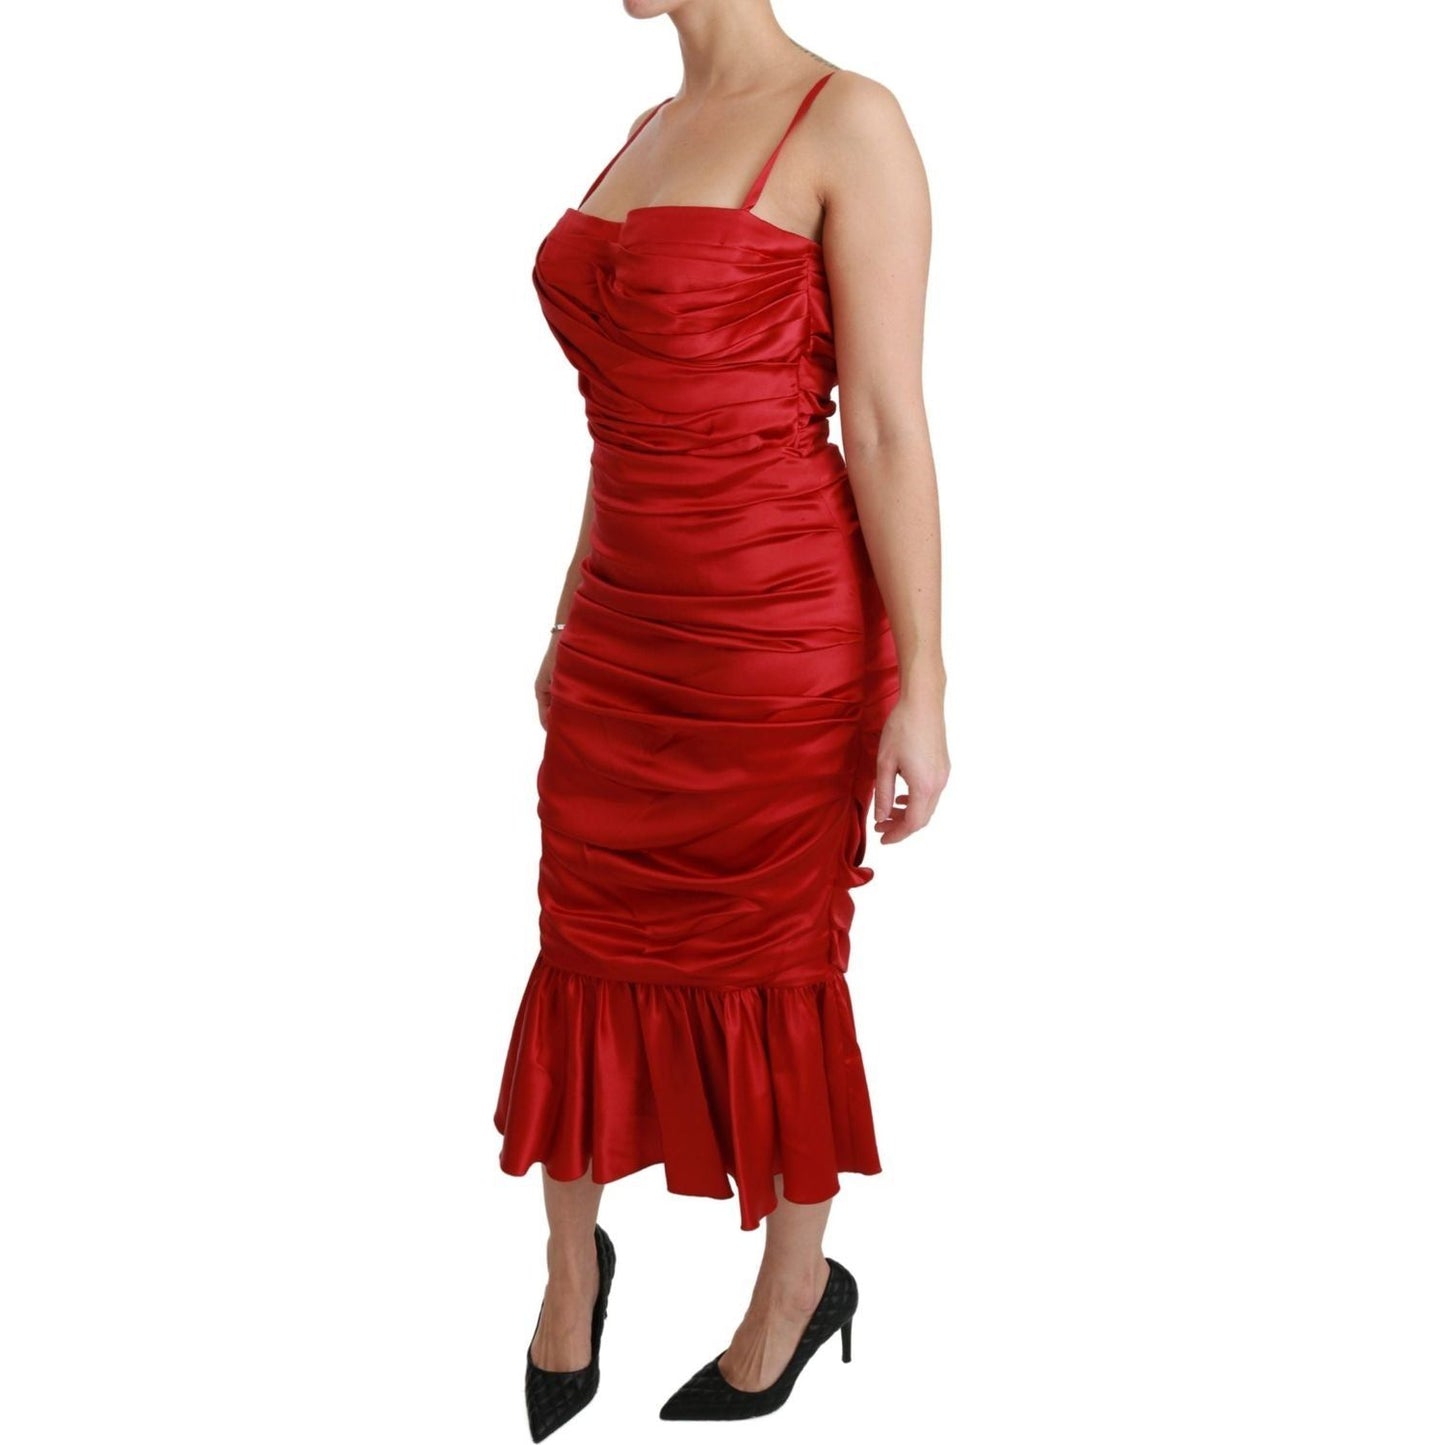 Dolce & Gabbana Exquisite Red Silk Fit and Flare Midi Dress red-silk-stretch-mermaid-bodycon-dress